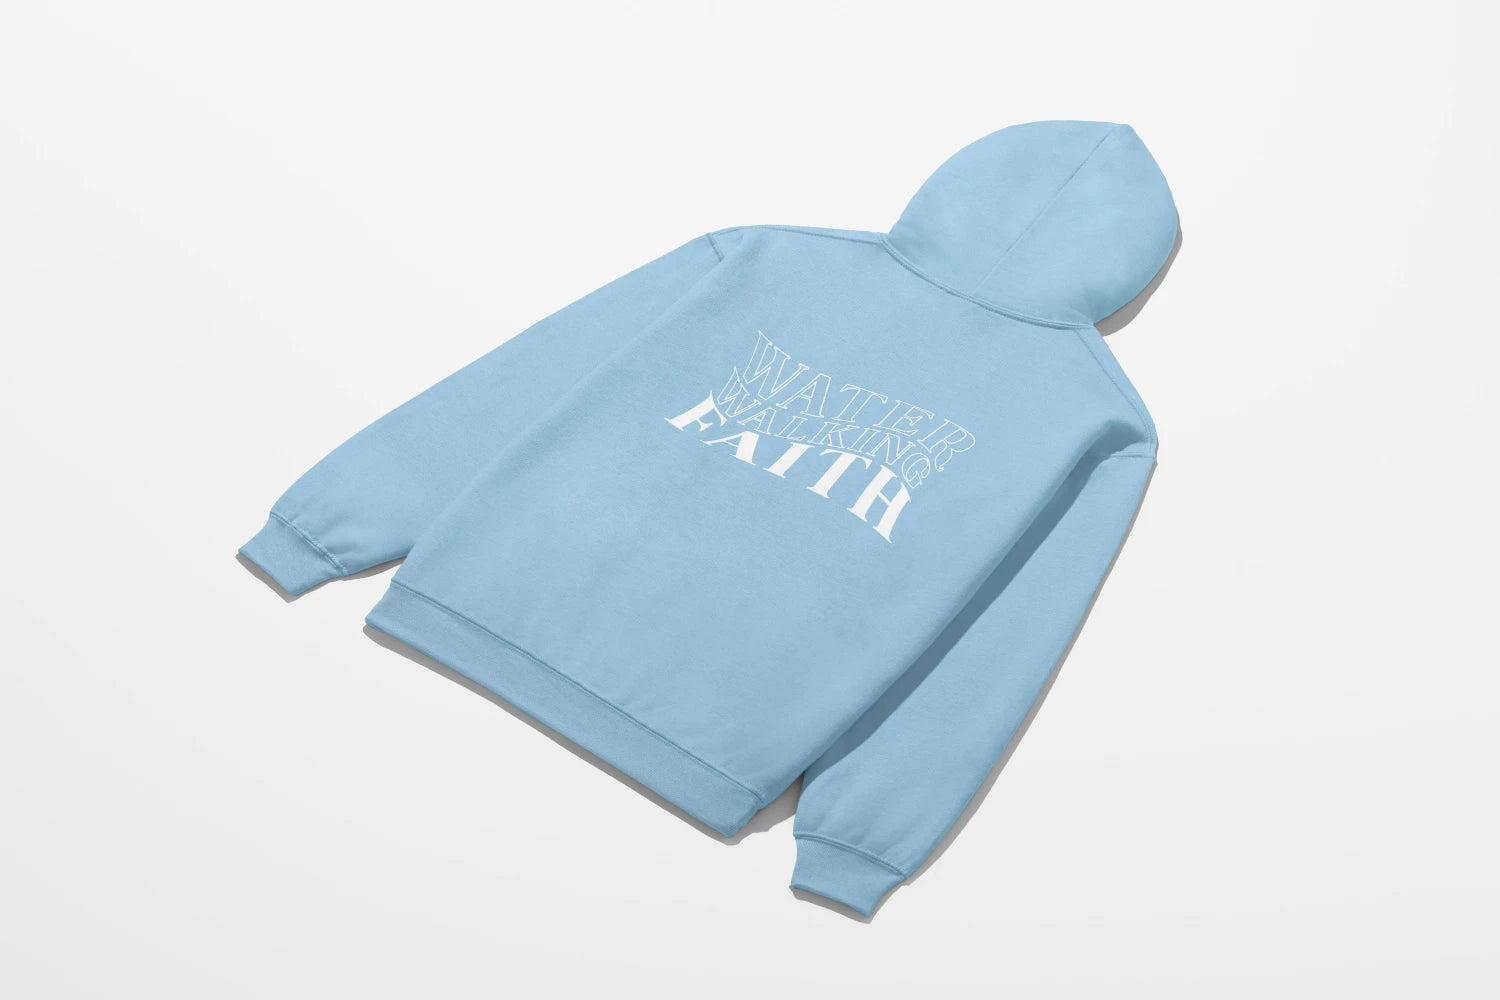 A Water Walking Faith Hoodie by Be Still and Know with "walk by faith" on it.